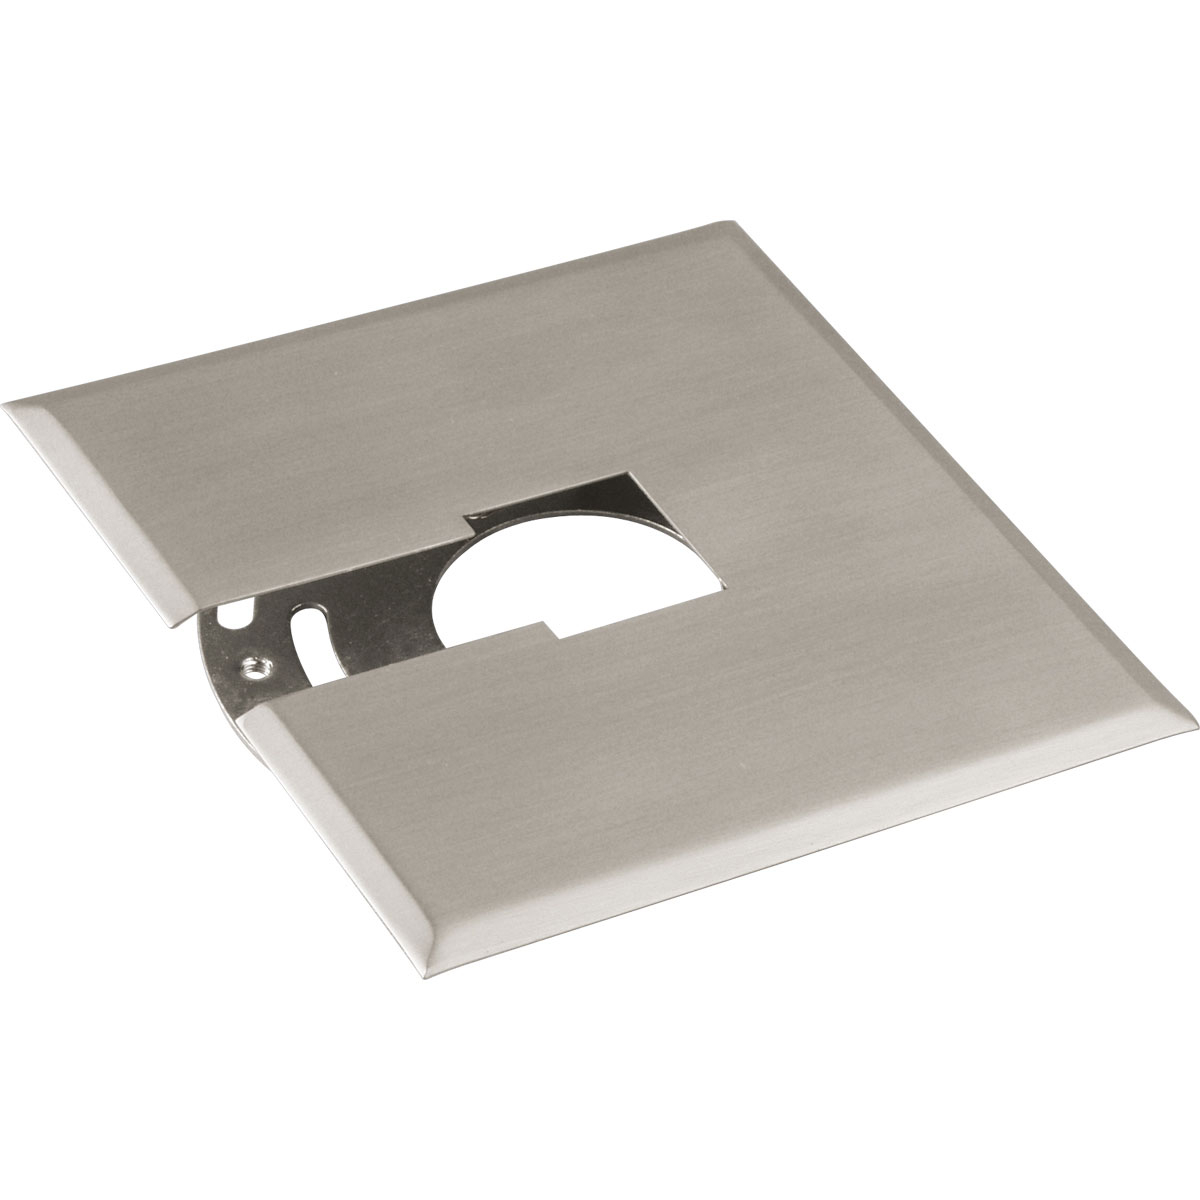 Canopy Kit Flush Mount. Mounting plate can be used anywhere along track. Slips between ceiling and track. Brushed Nickel finish.